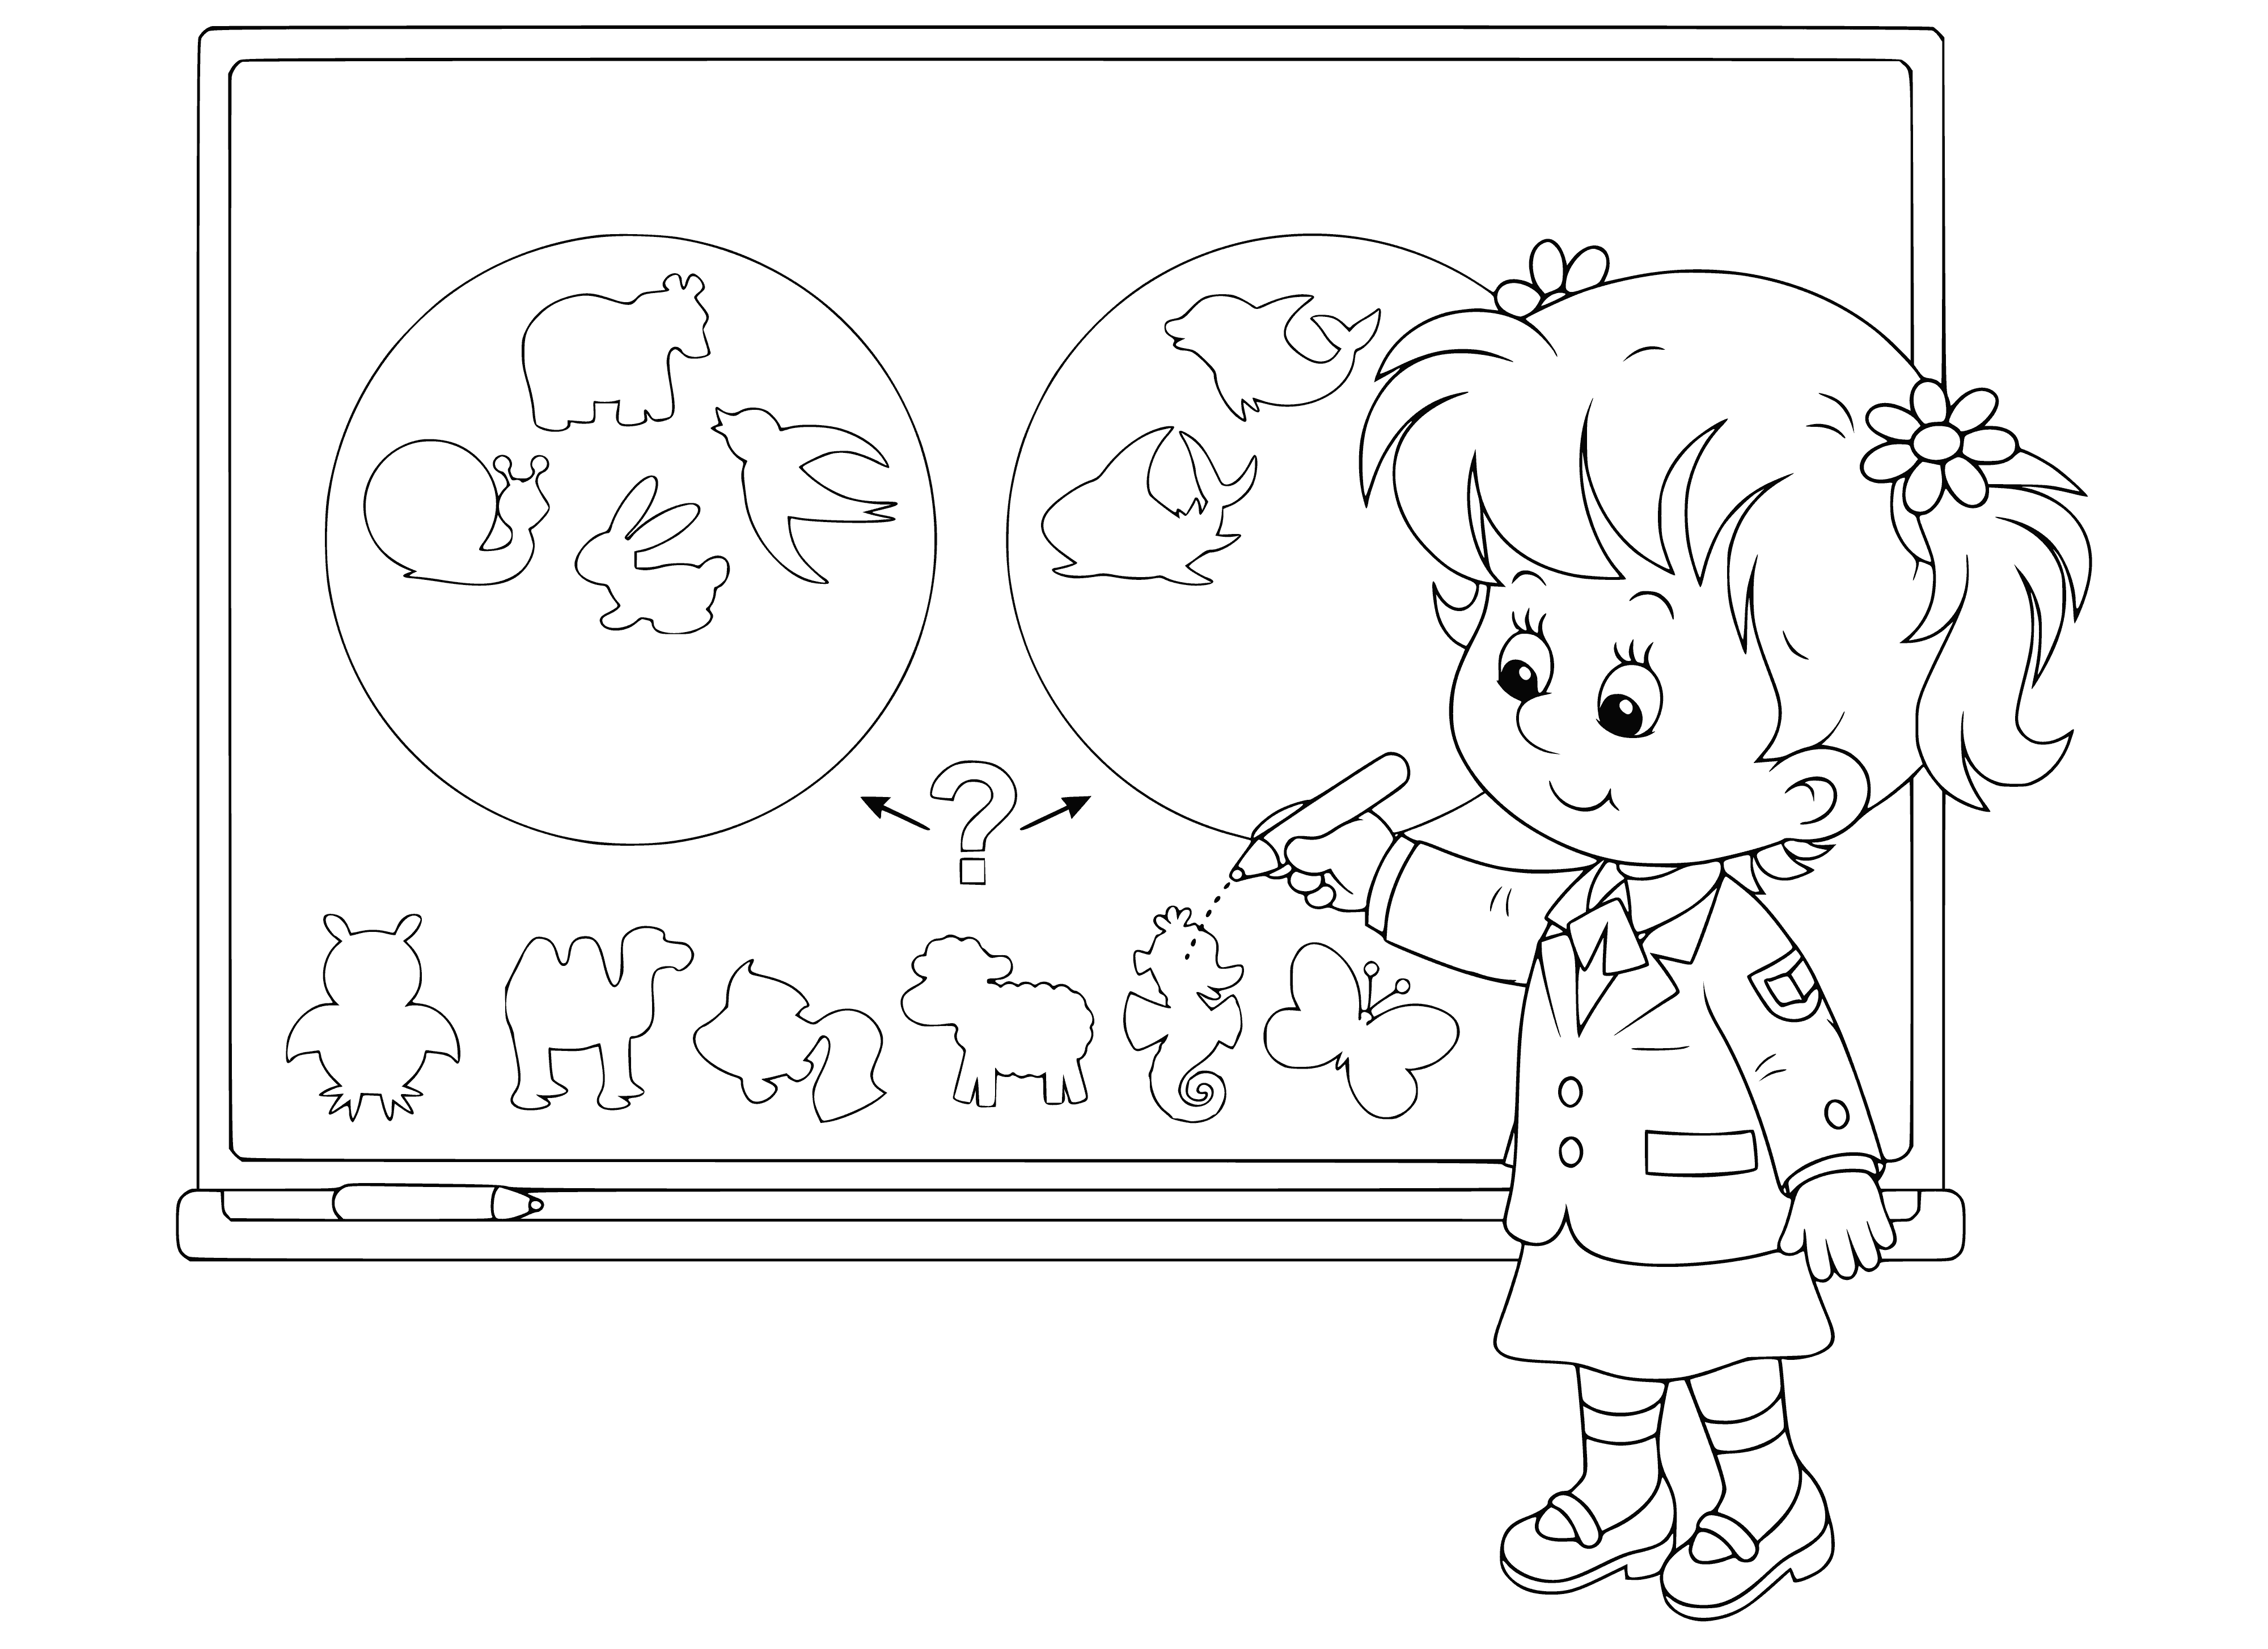 coloring page: Girl raises hand, answering teacher's question in classroom. #studying